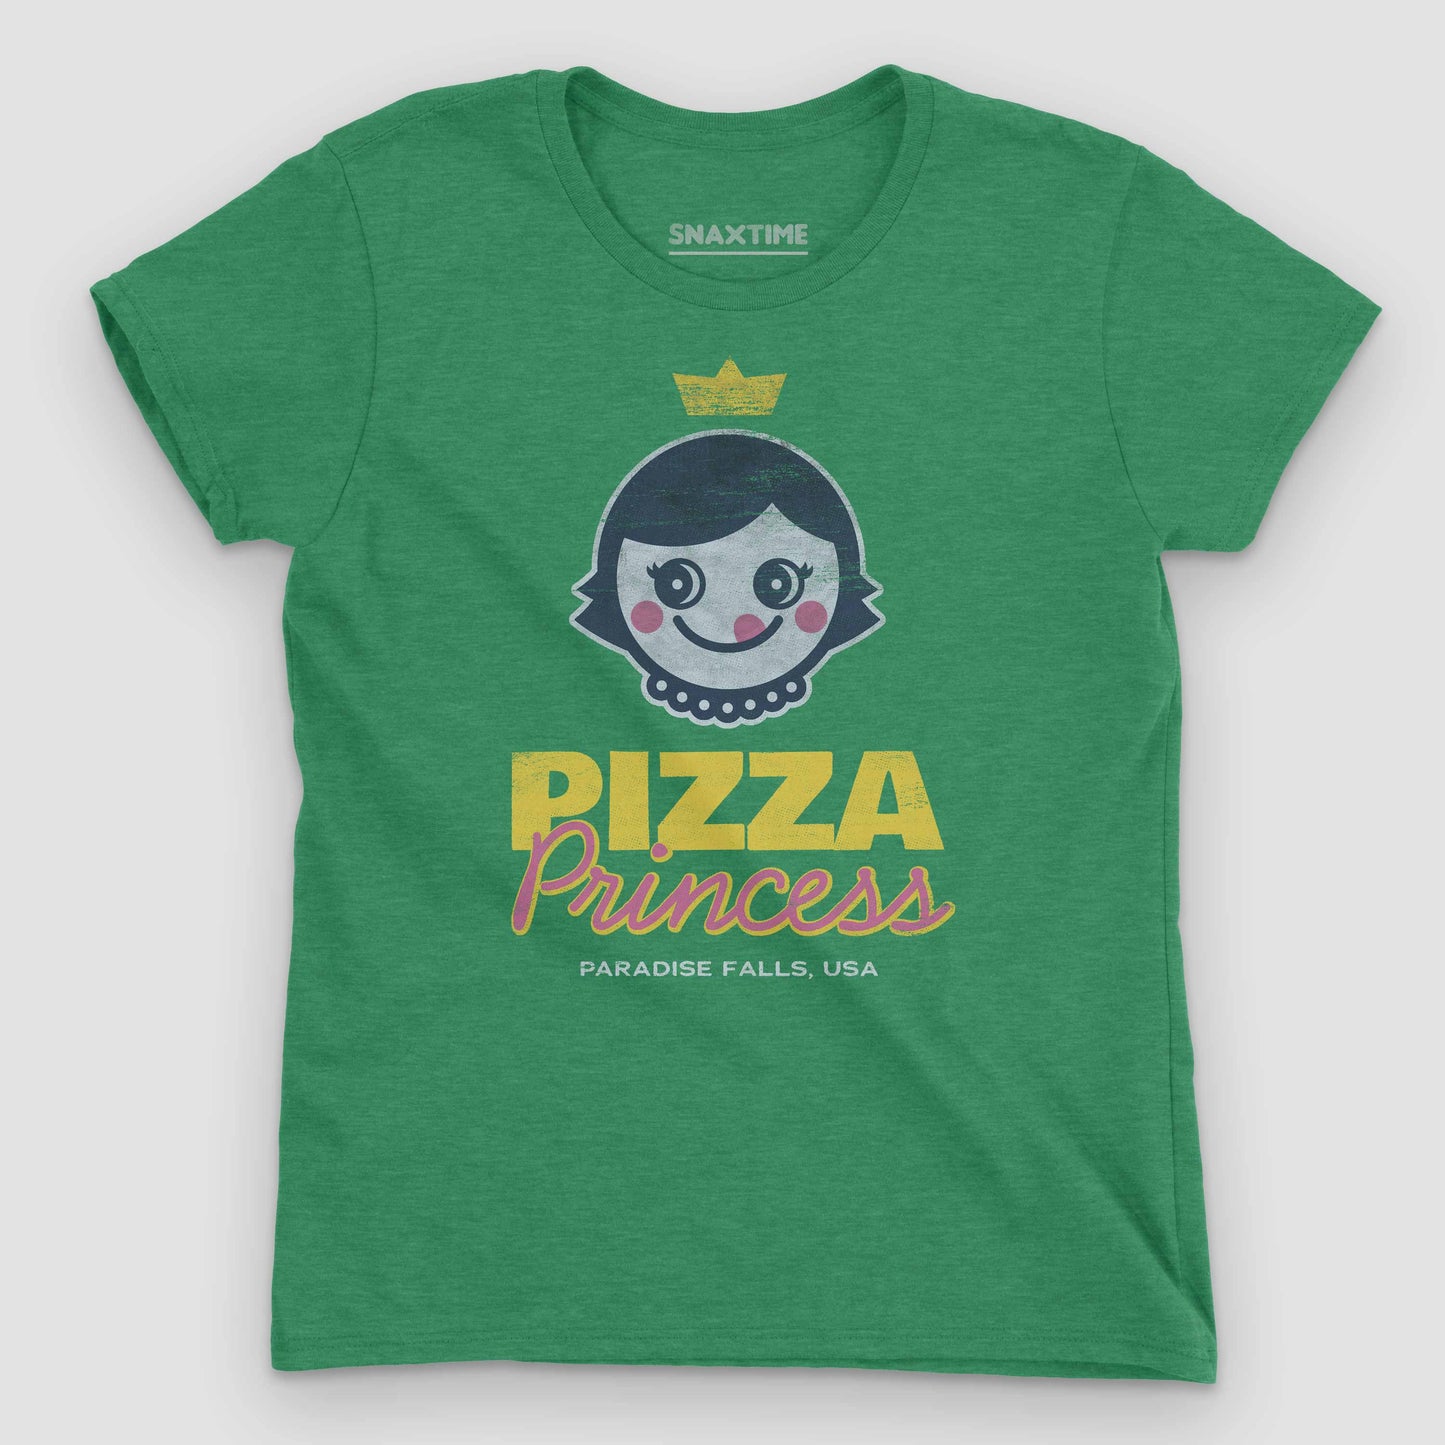 Heather Green Pizza Princess Women's Graphic T-Shirt by Snaxtime